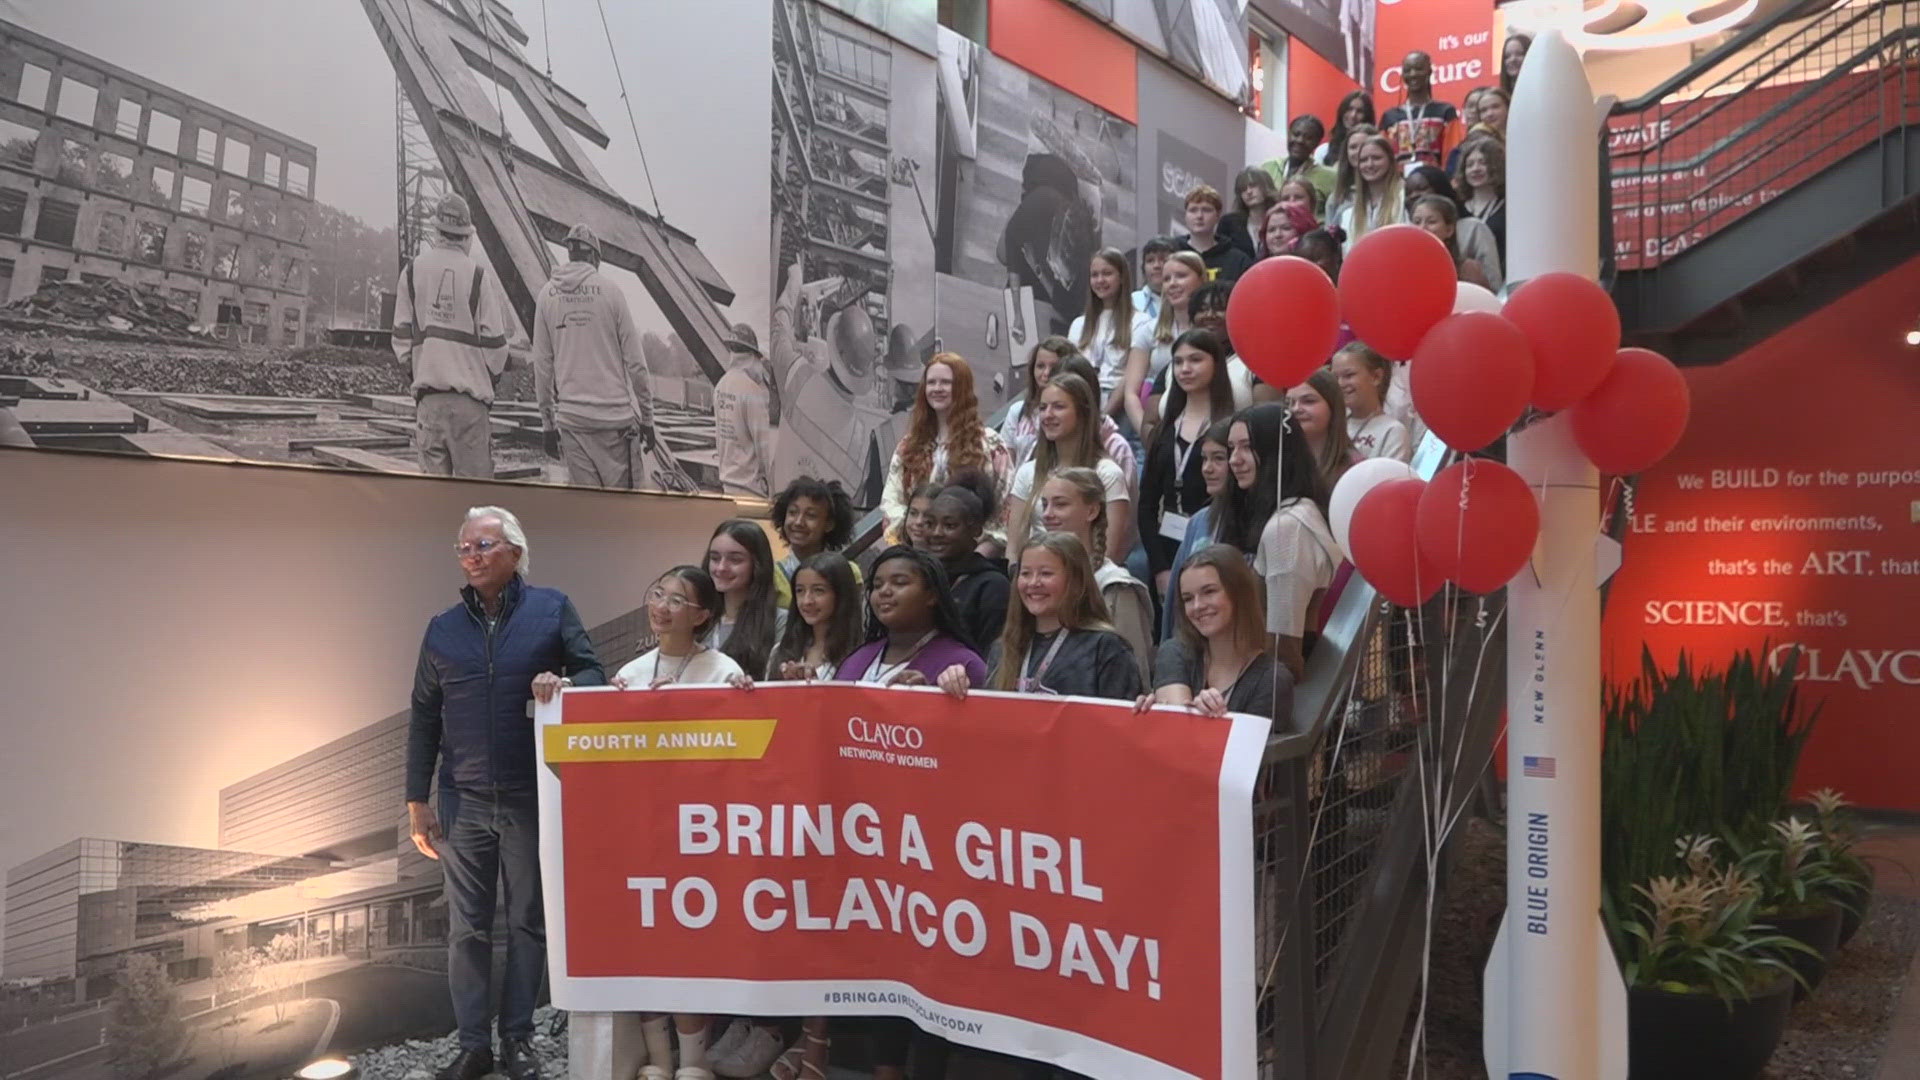 Right now the construction industry is dominated by men. Clayco is working to change that by inviting young girls to their campus.